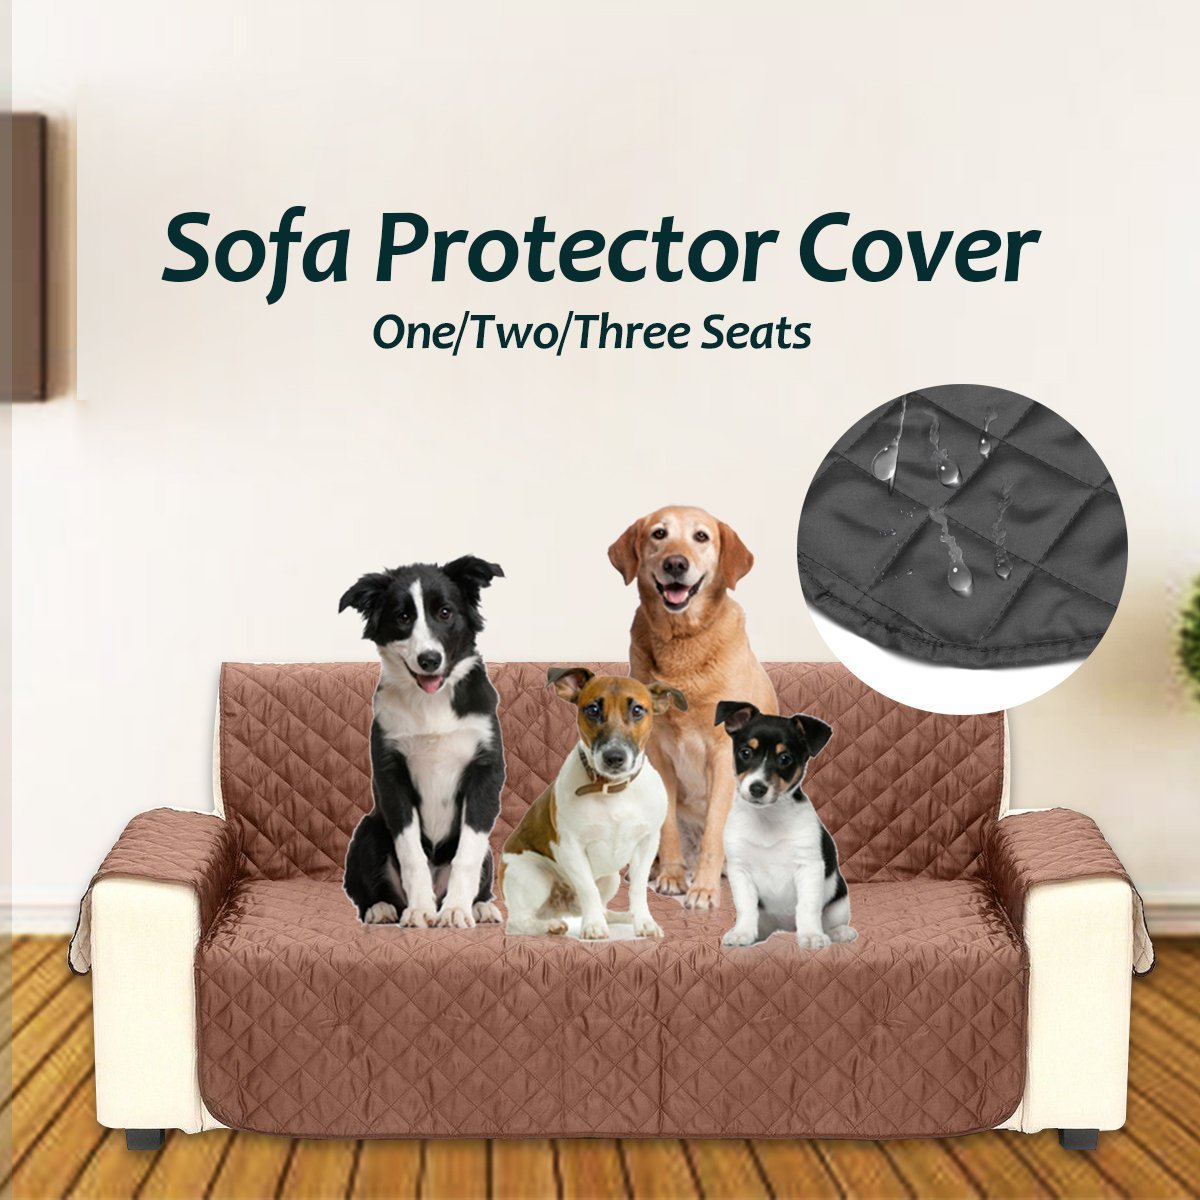 Waterproof Quilted Sofa Covers for Dogs Pets Kids Anti-Slip Couch Recliner Slipcovers 1/2/3 Seater - veooy